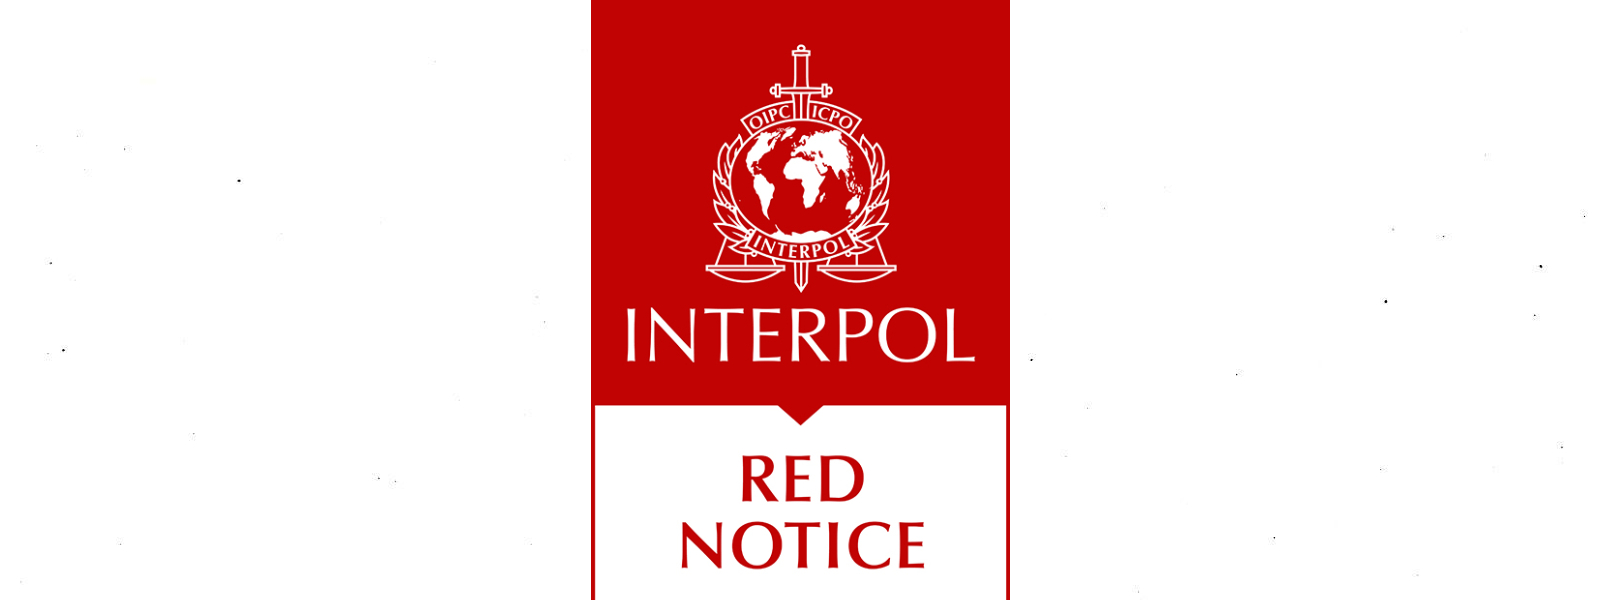 INTERPOL RED NOTICE obtained on 14 wanted Sri Lankan criminals